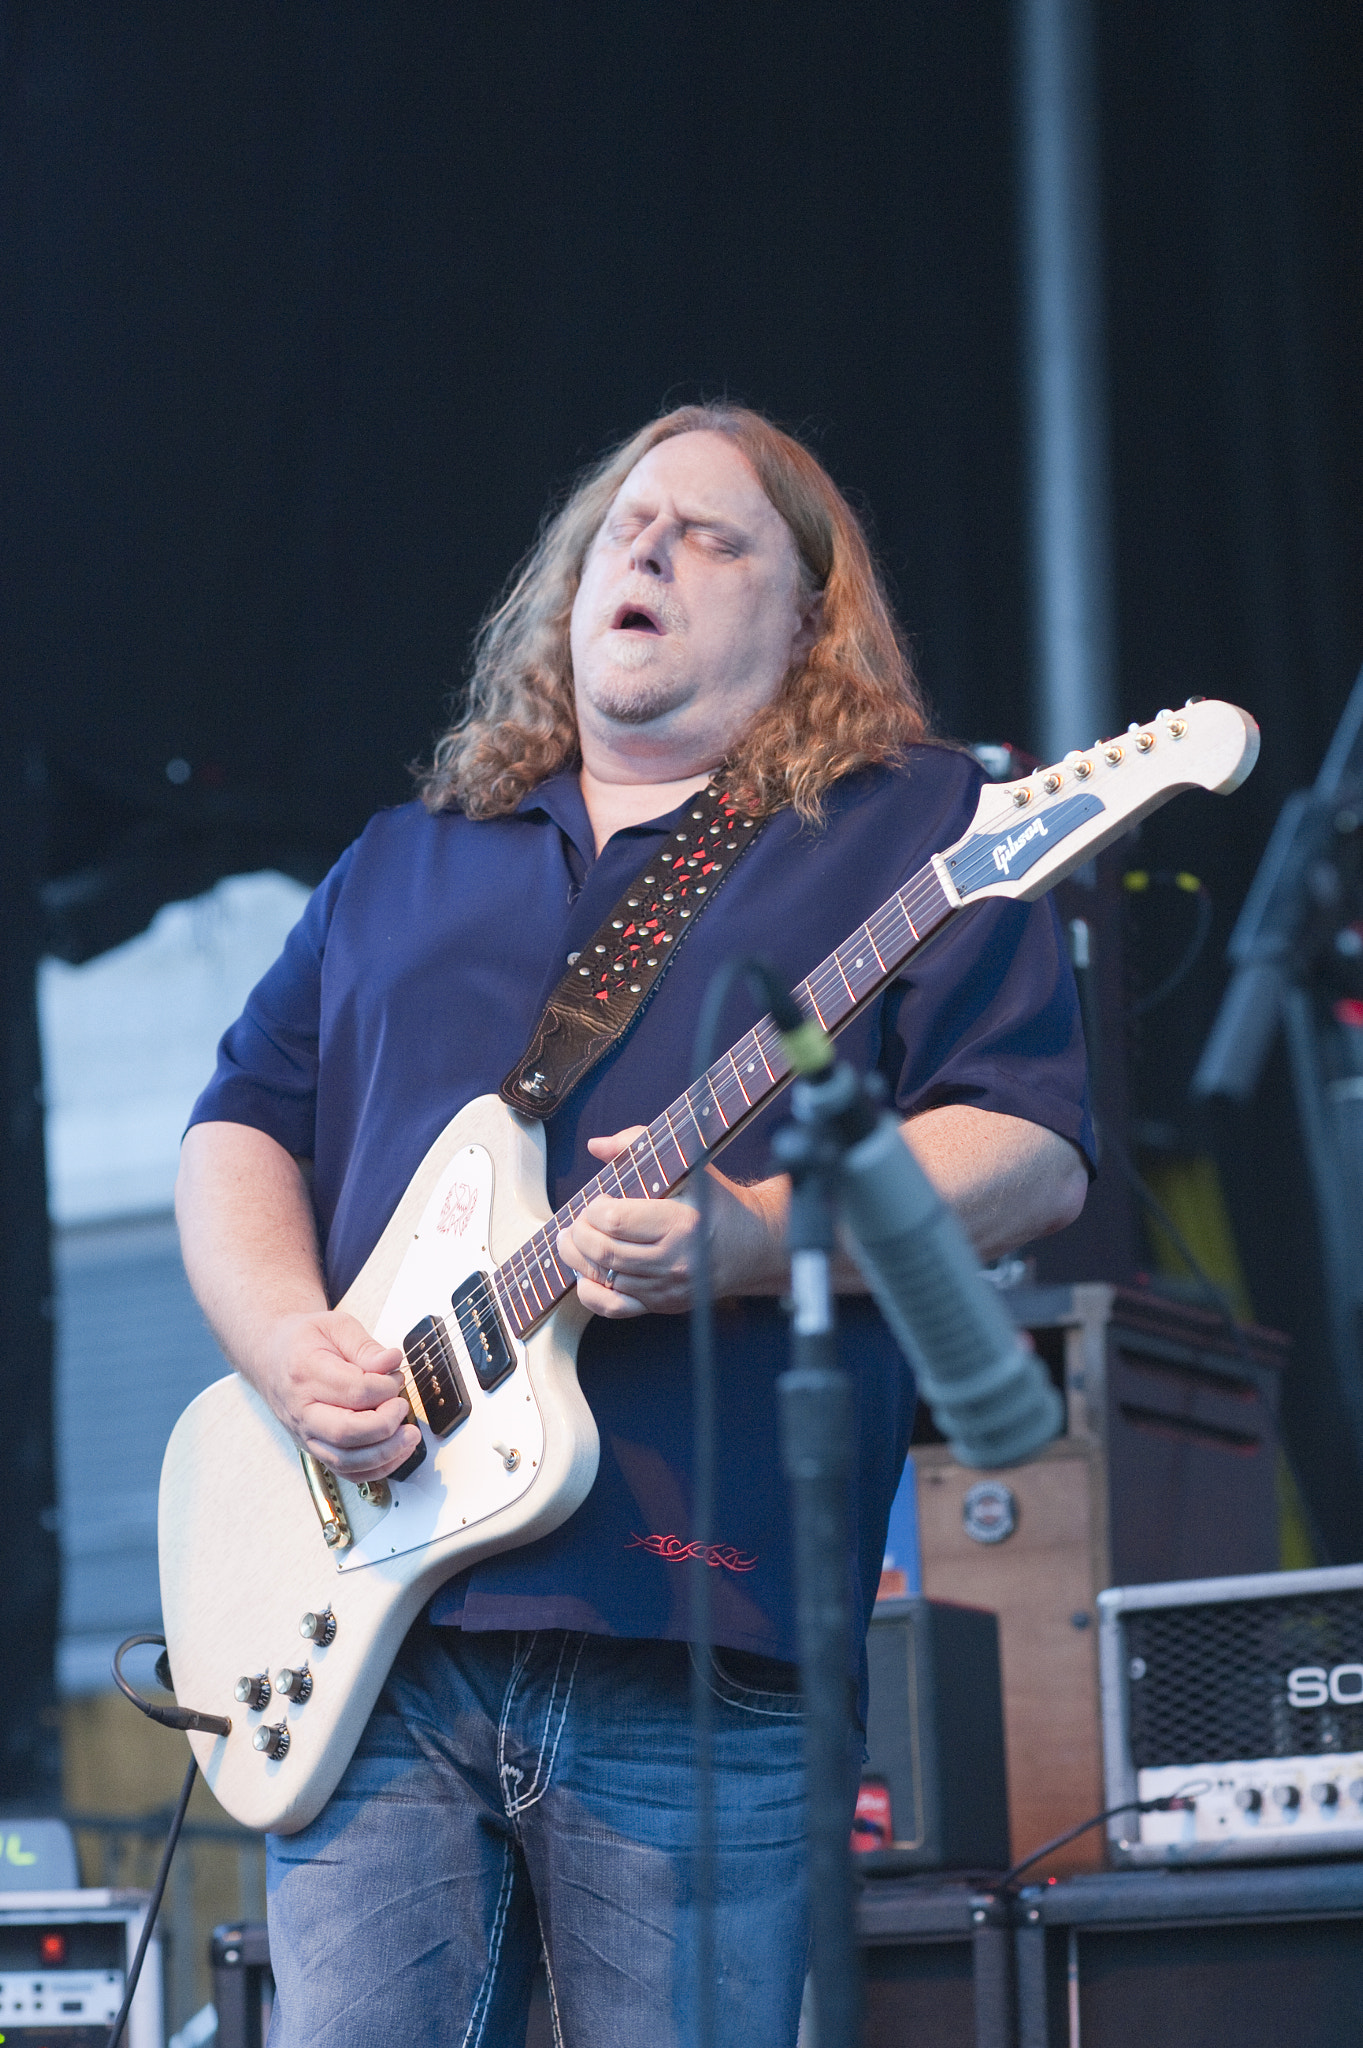 Nikon D700 sample photo. Artscape arts festival, baltimore maryland 
warren haynes of government mule playing guitar on stage photography